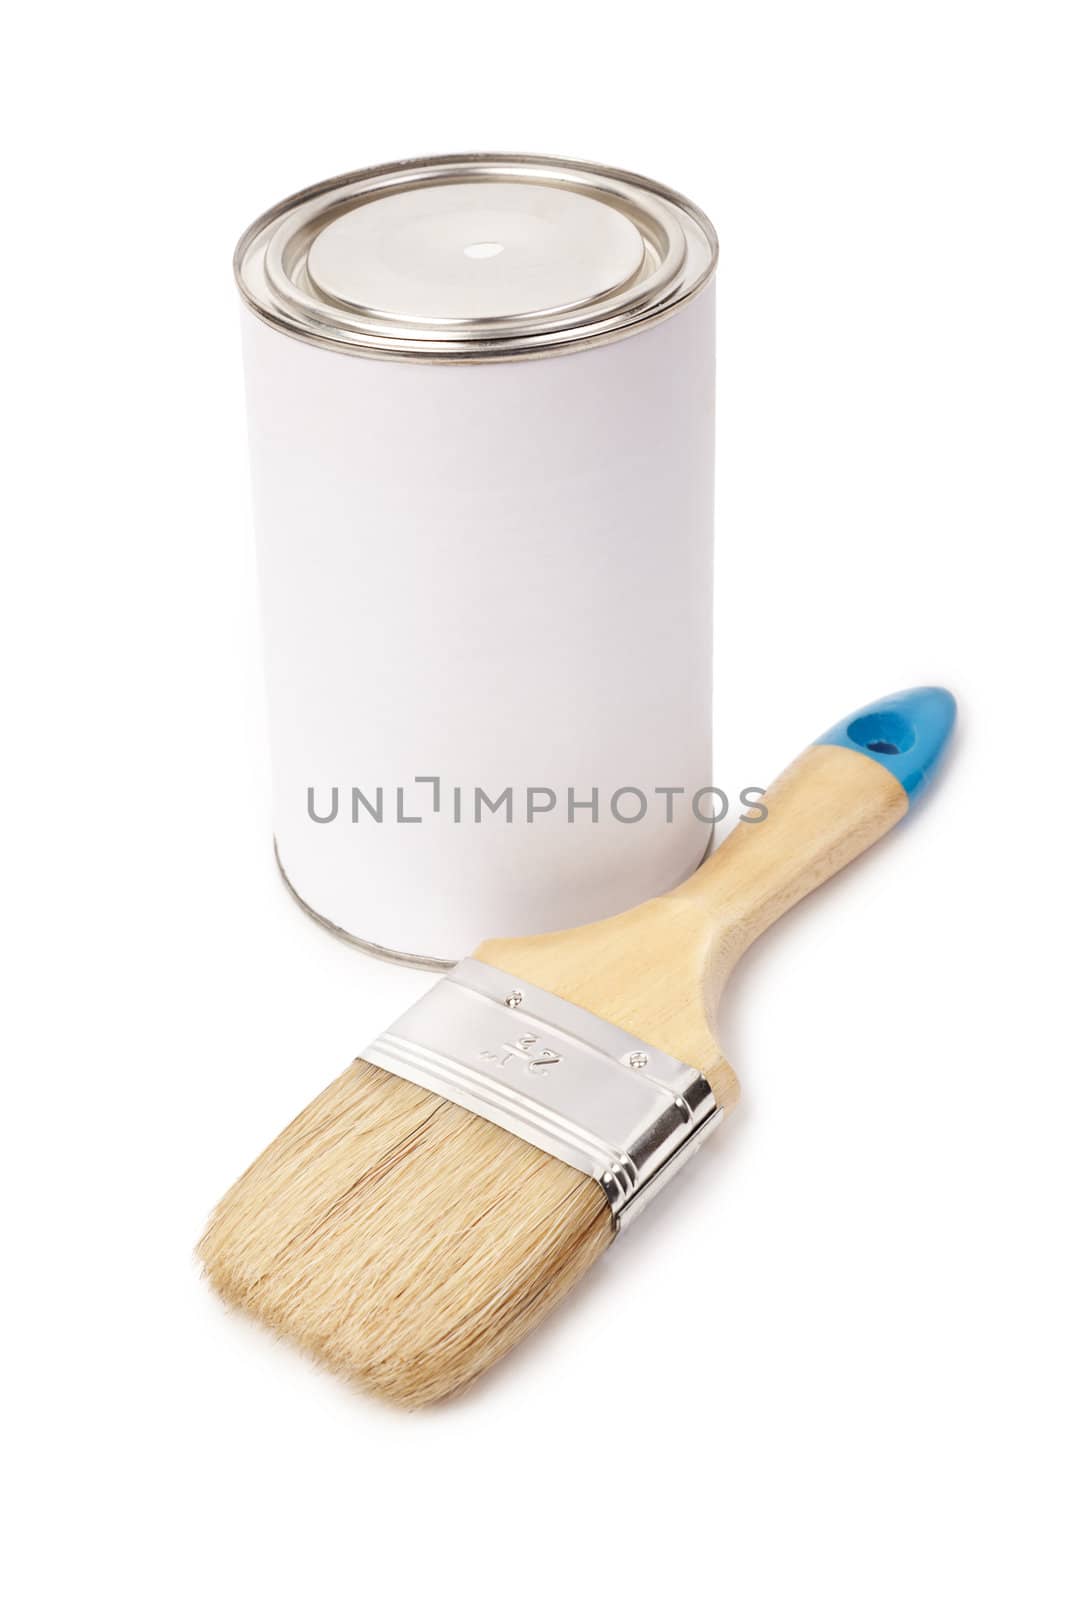 blank and new brush isolated on a white background